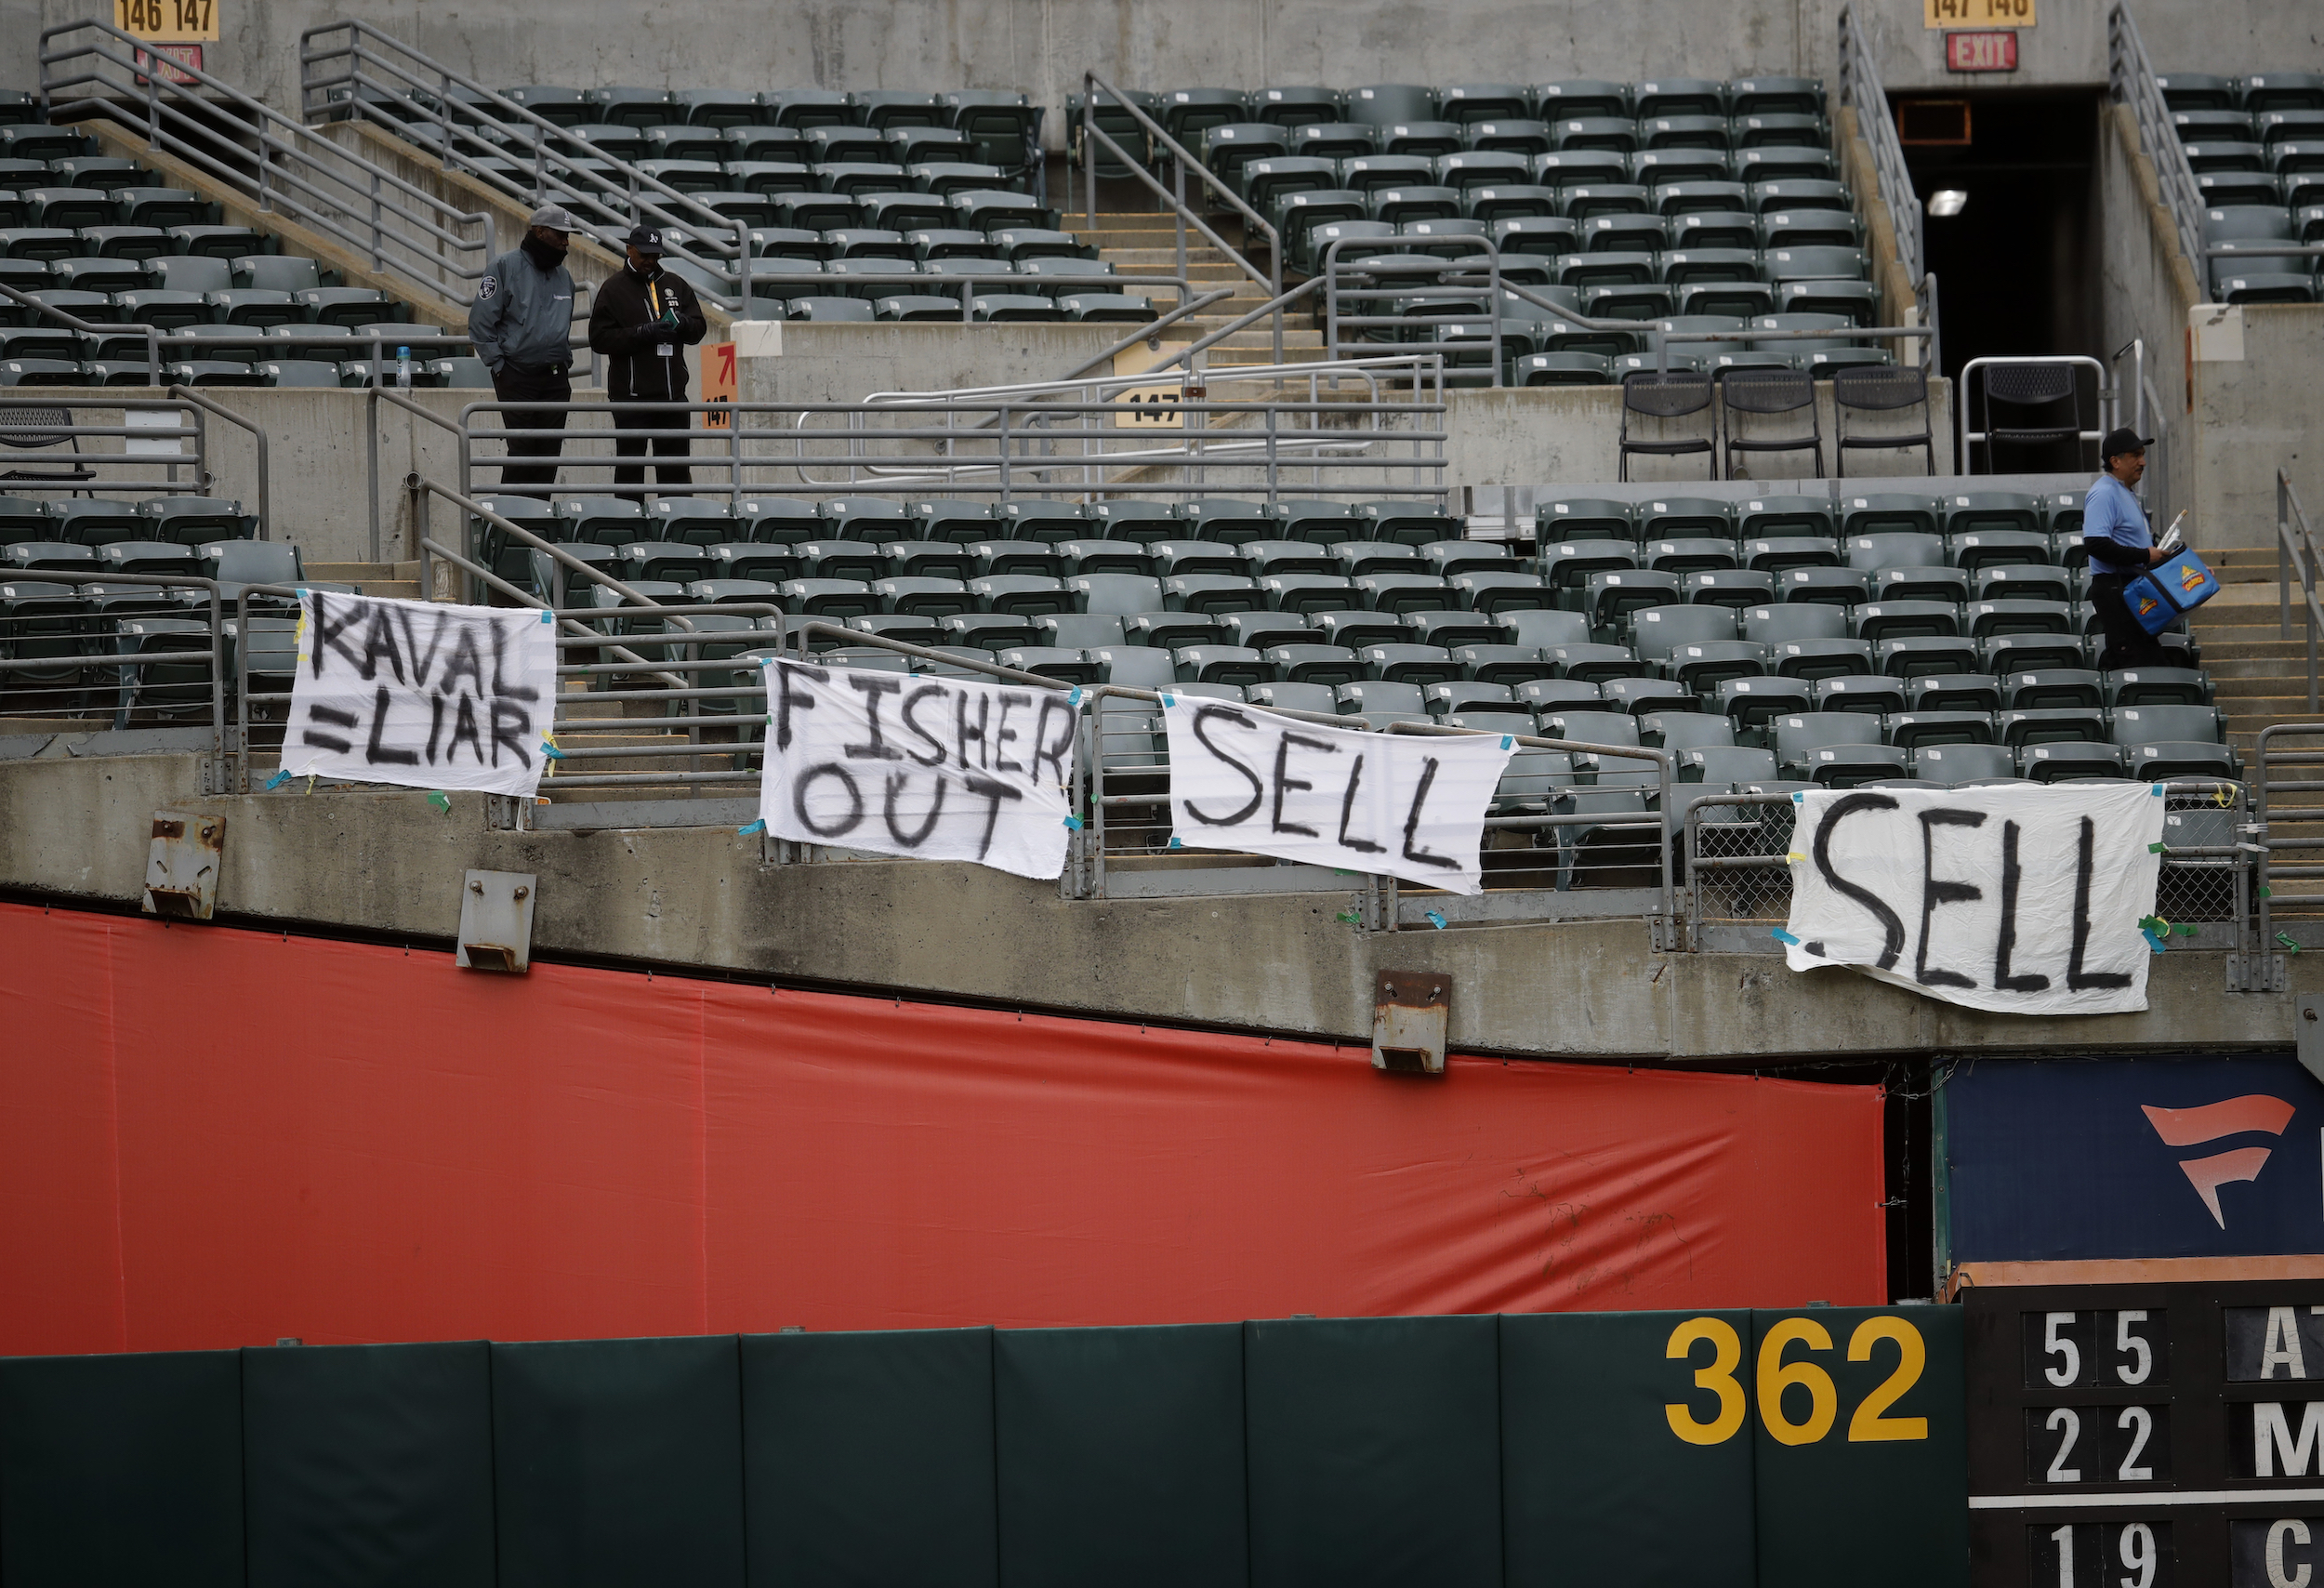 Fans hang signs at Oakland Coliseum calling for John Fisher to sell the Athletics.